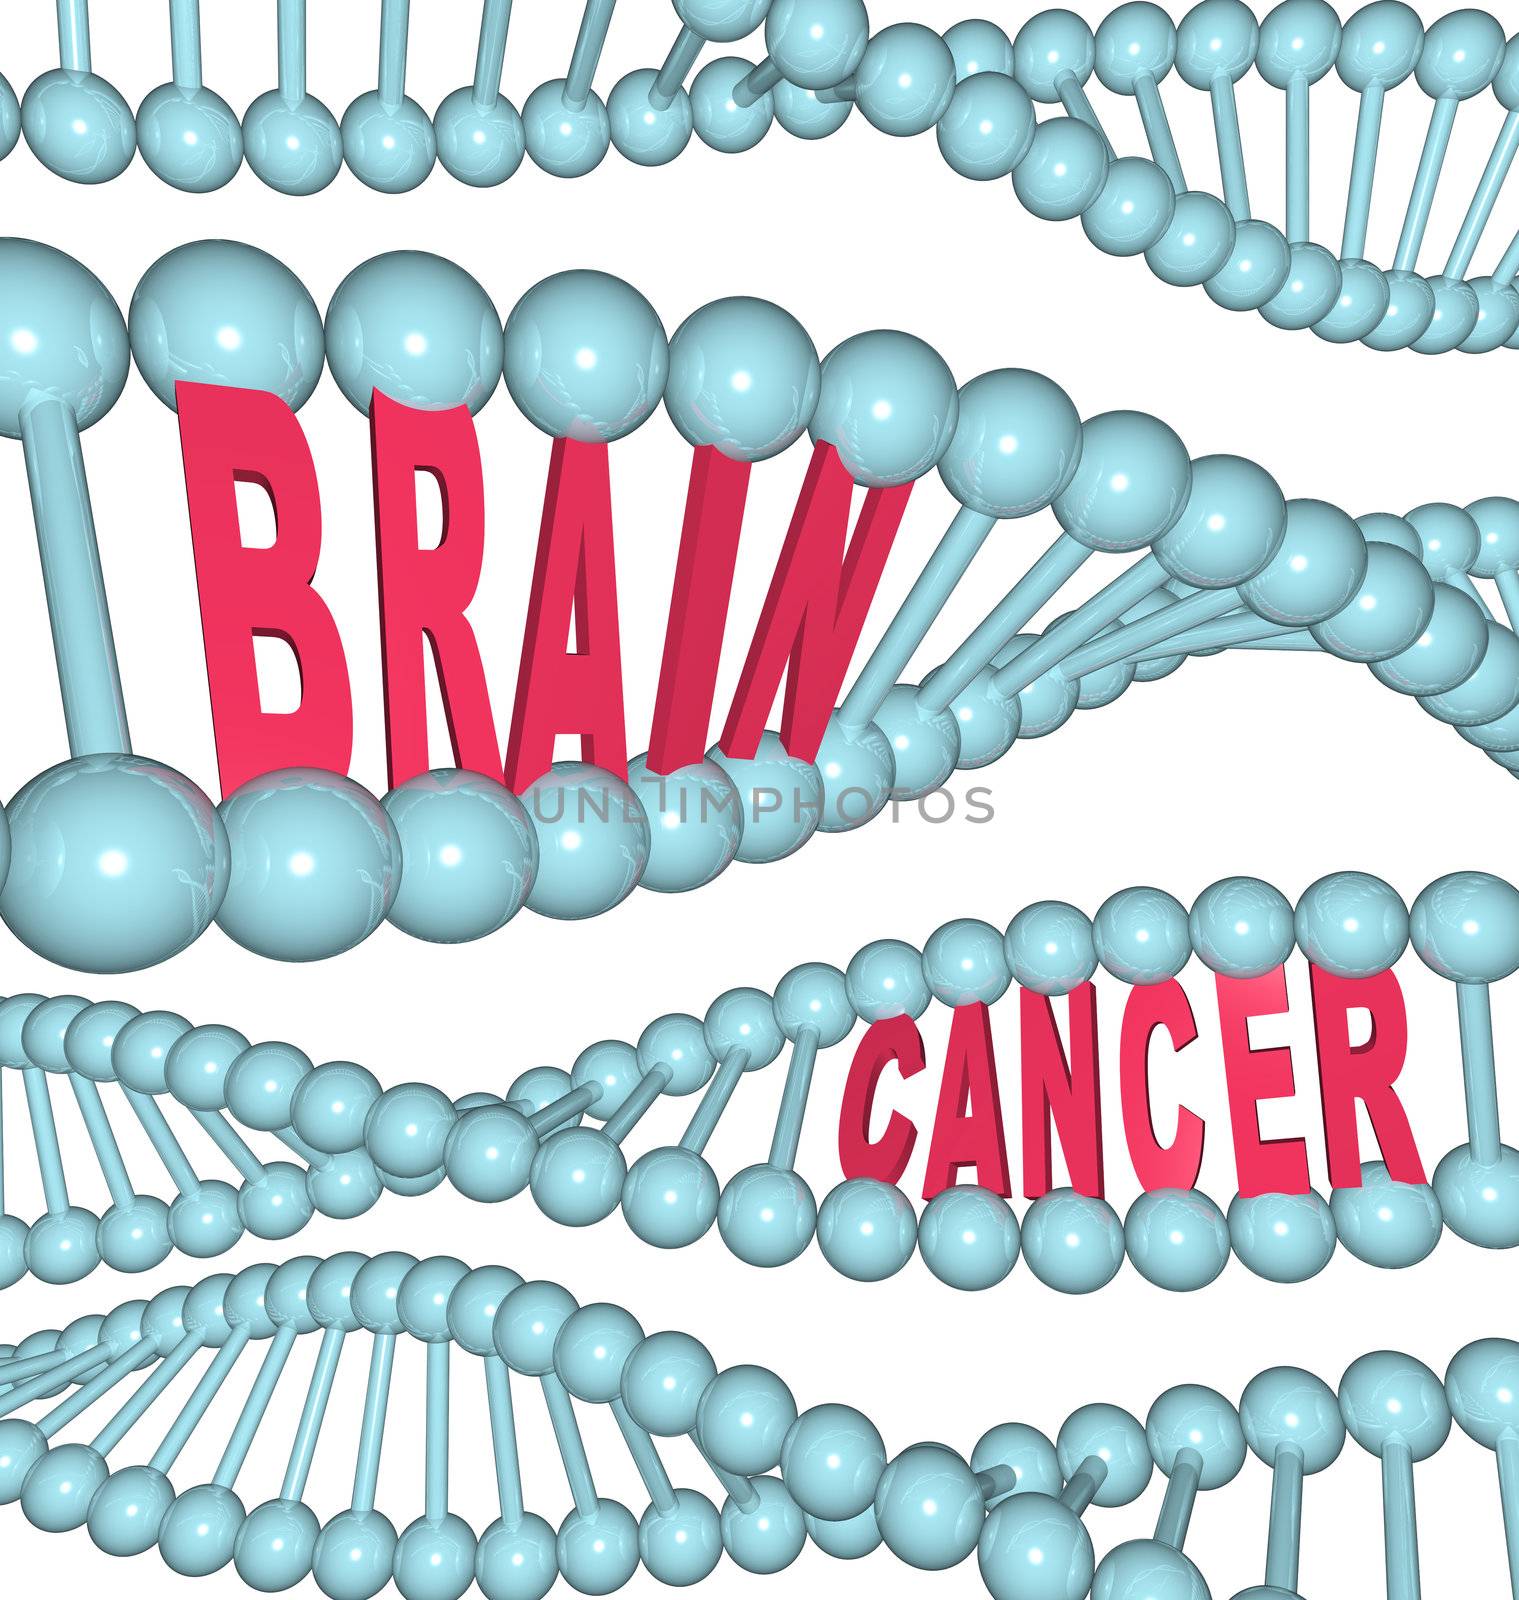 An illustrated DNA strand with the words Brain Cancer embedded in the chain, symbolizing the disease also referred to as glioblastoma multiform, anaplastic glioma, astrocytoma, and oligodendroglioma